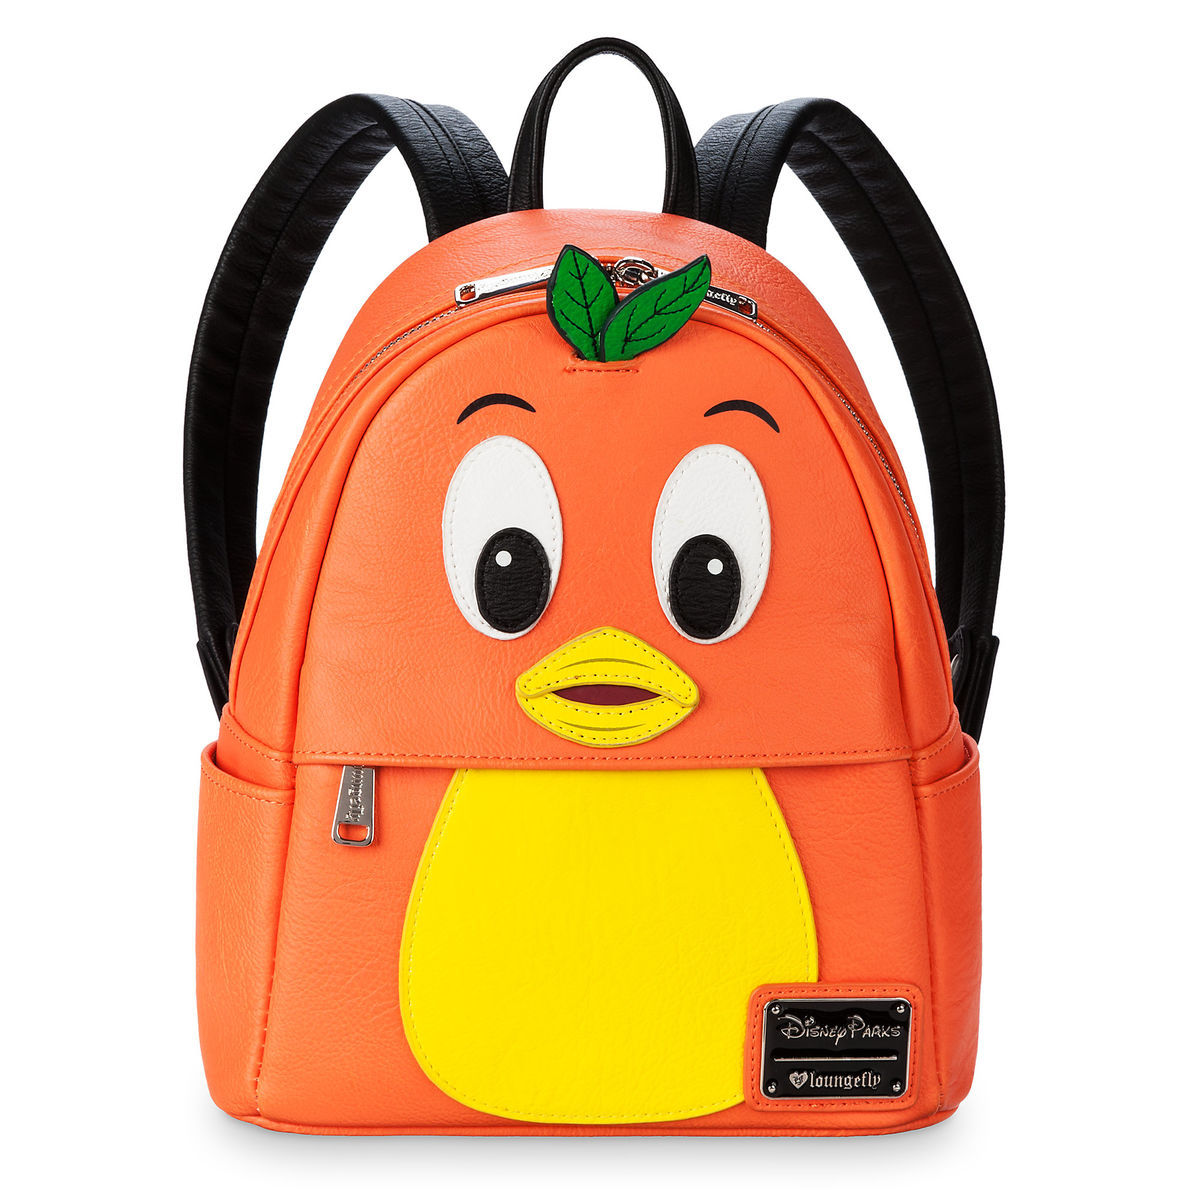 Disney Florida Orange Bird Mini Backpack by Loungefly New with Tags